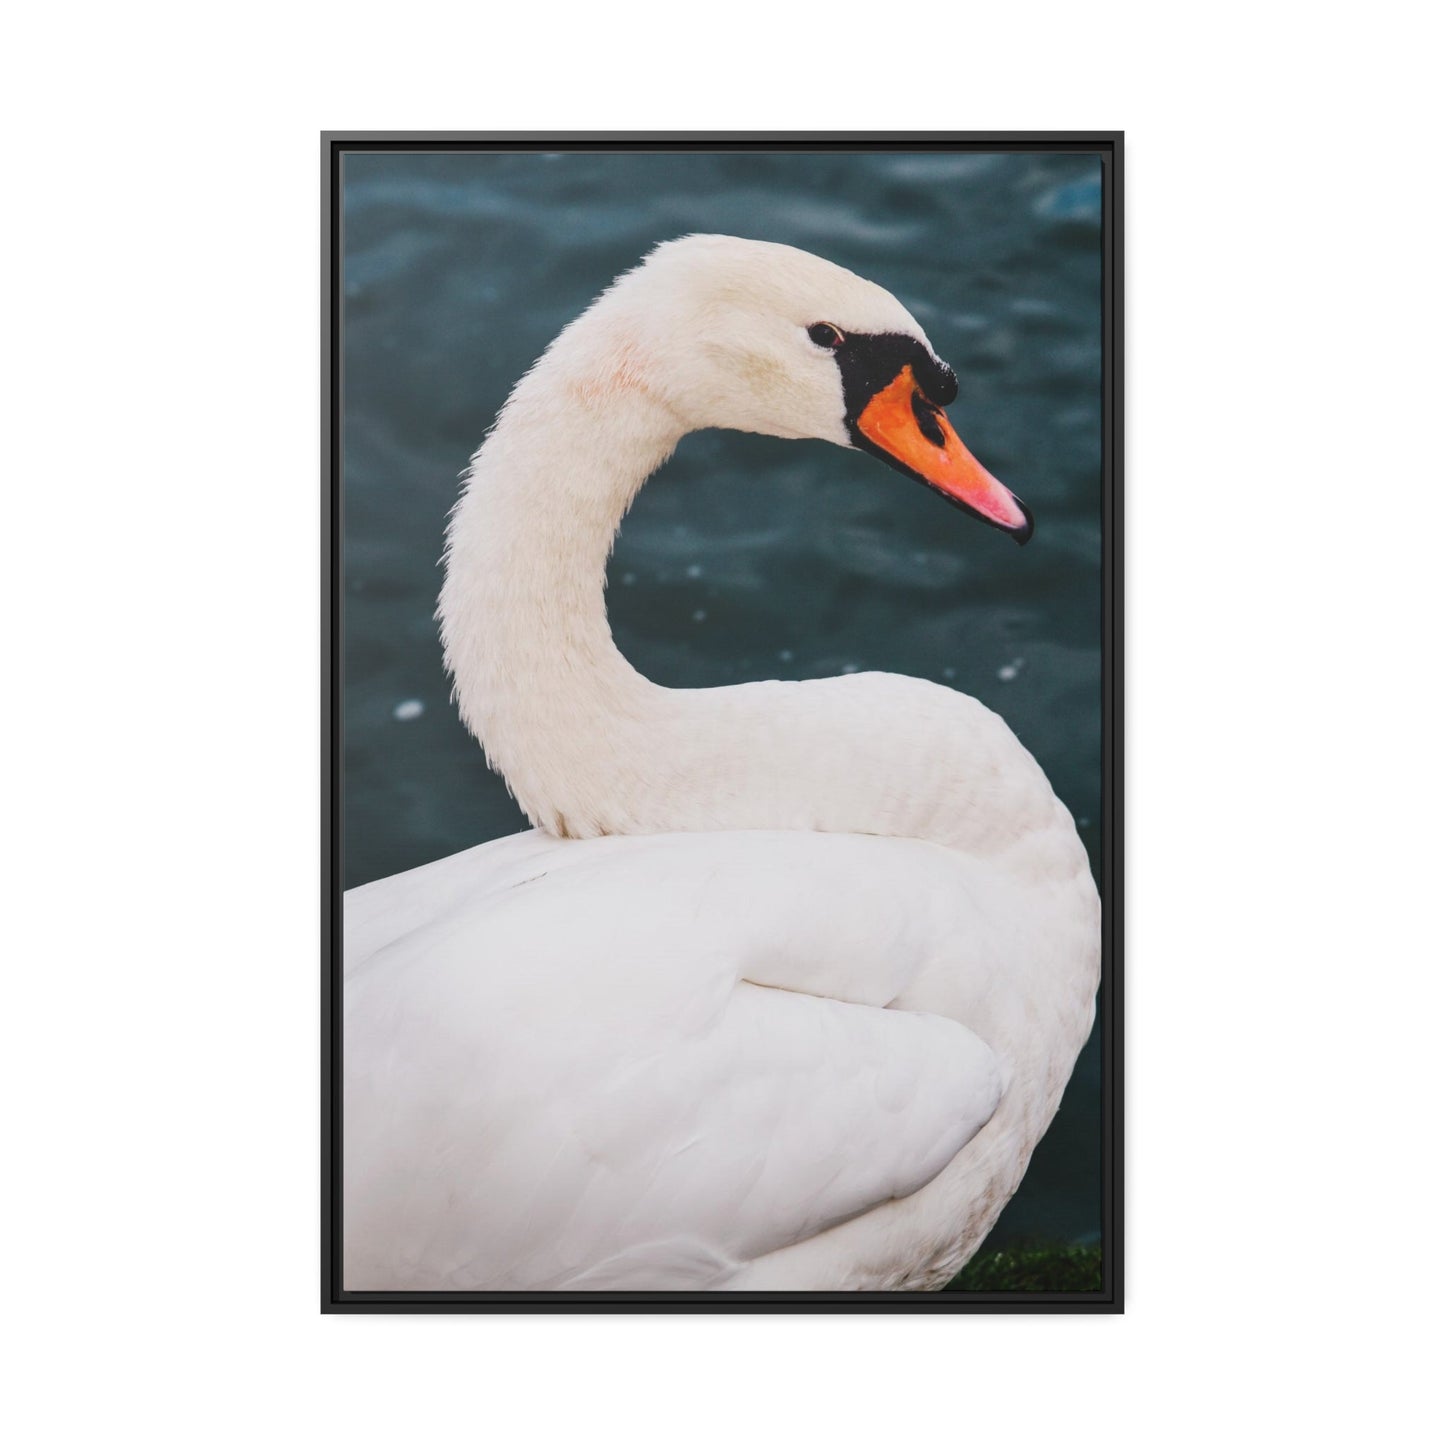 The Calm of Nature: Natural Canvas Print of Swan in a Serene Landscape